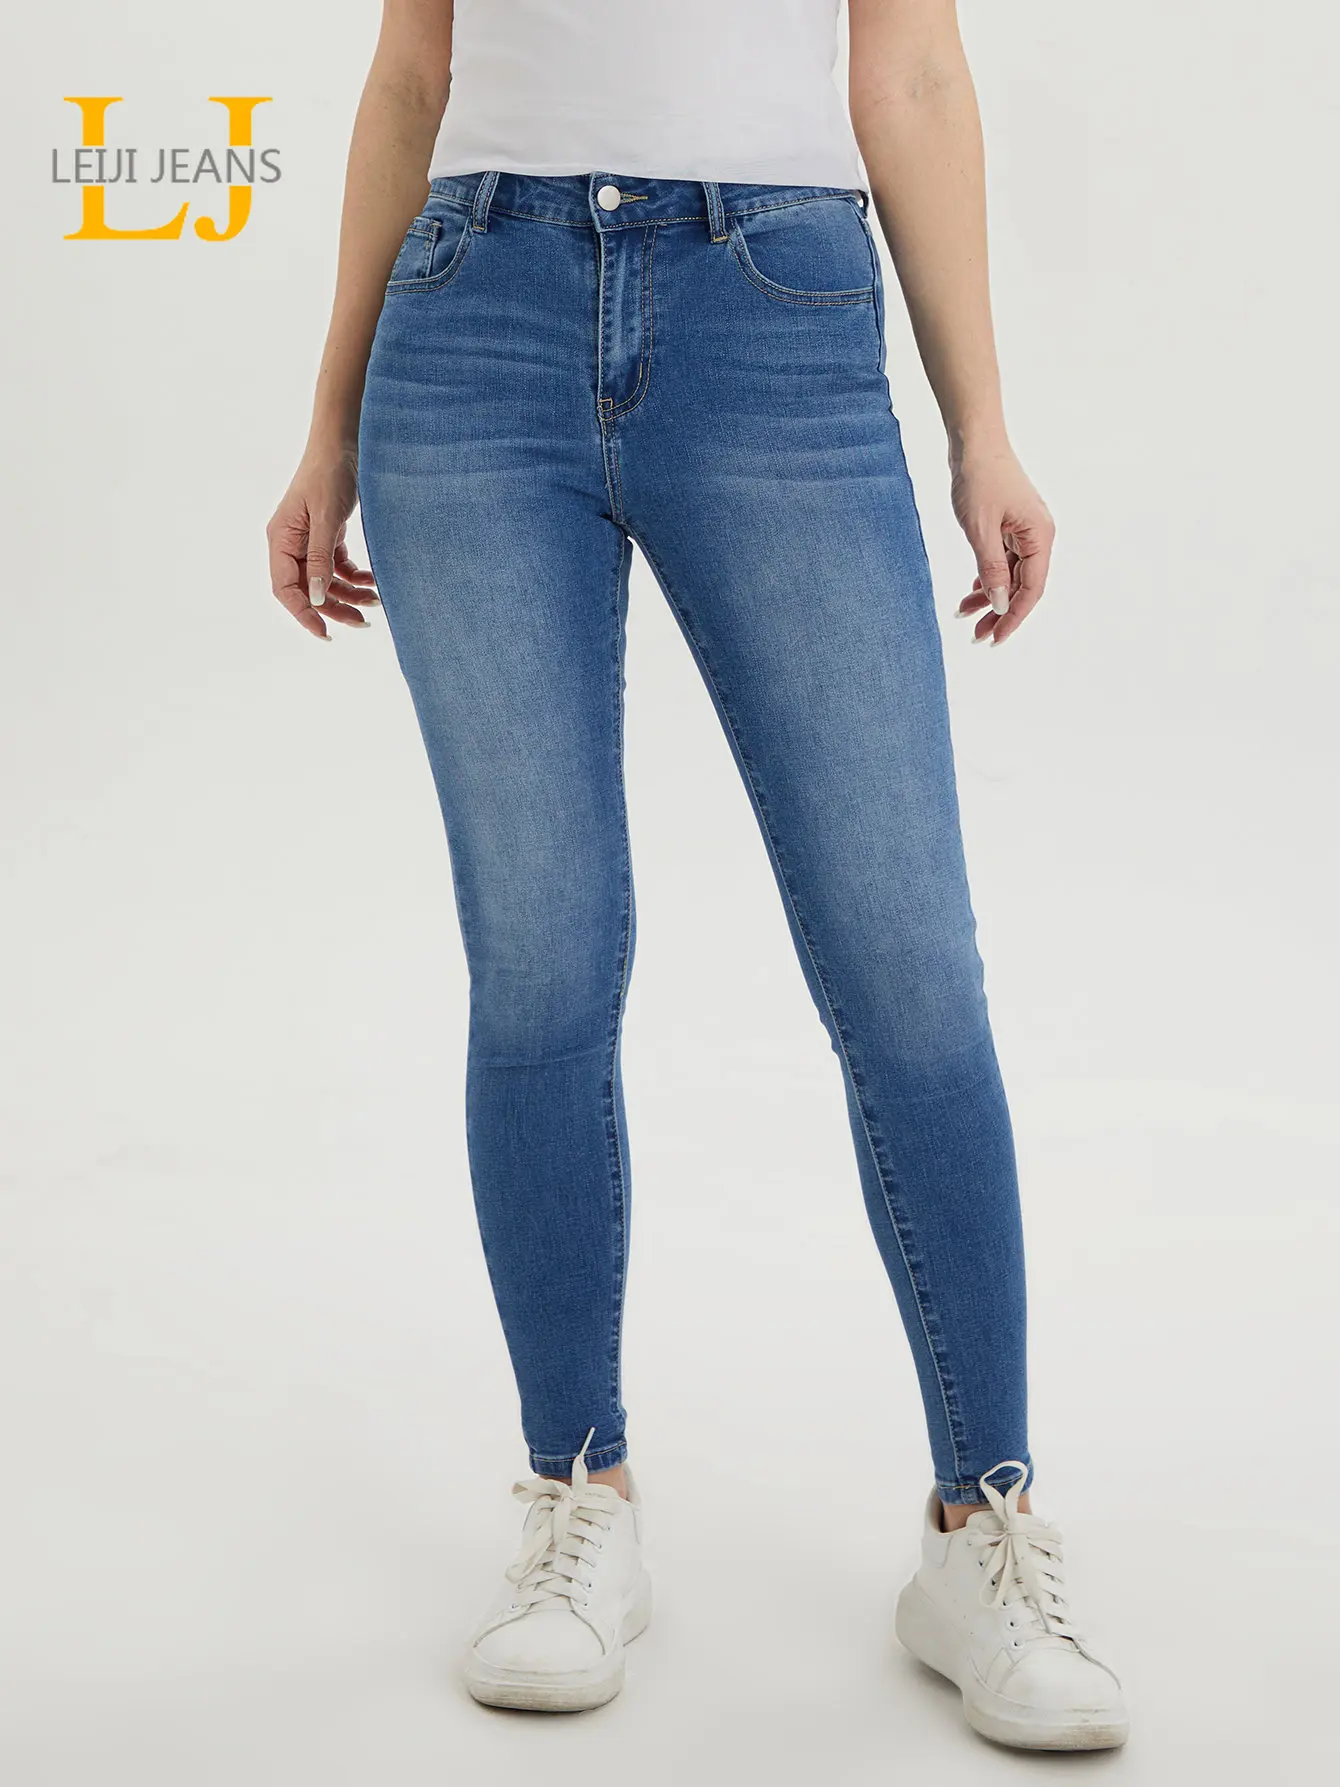 Skinny Women Jeans High Waist Denim Jeans Pants Stretchy Full Length Mom Jeans Pencil Jeans for Women 100kgs Washing Elastic